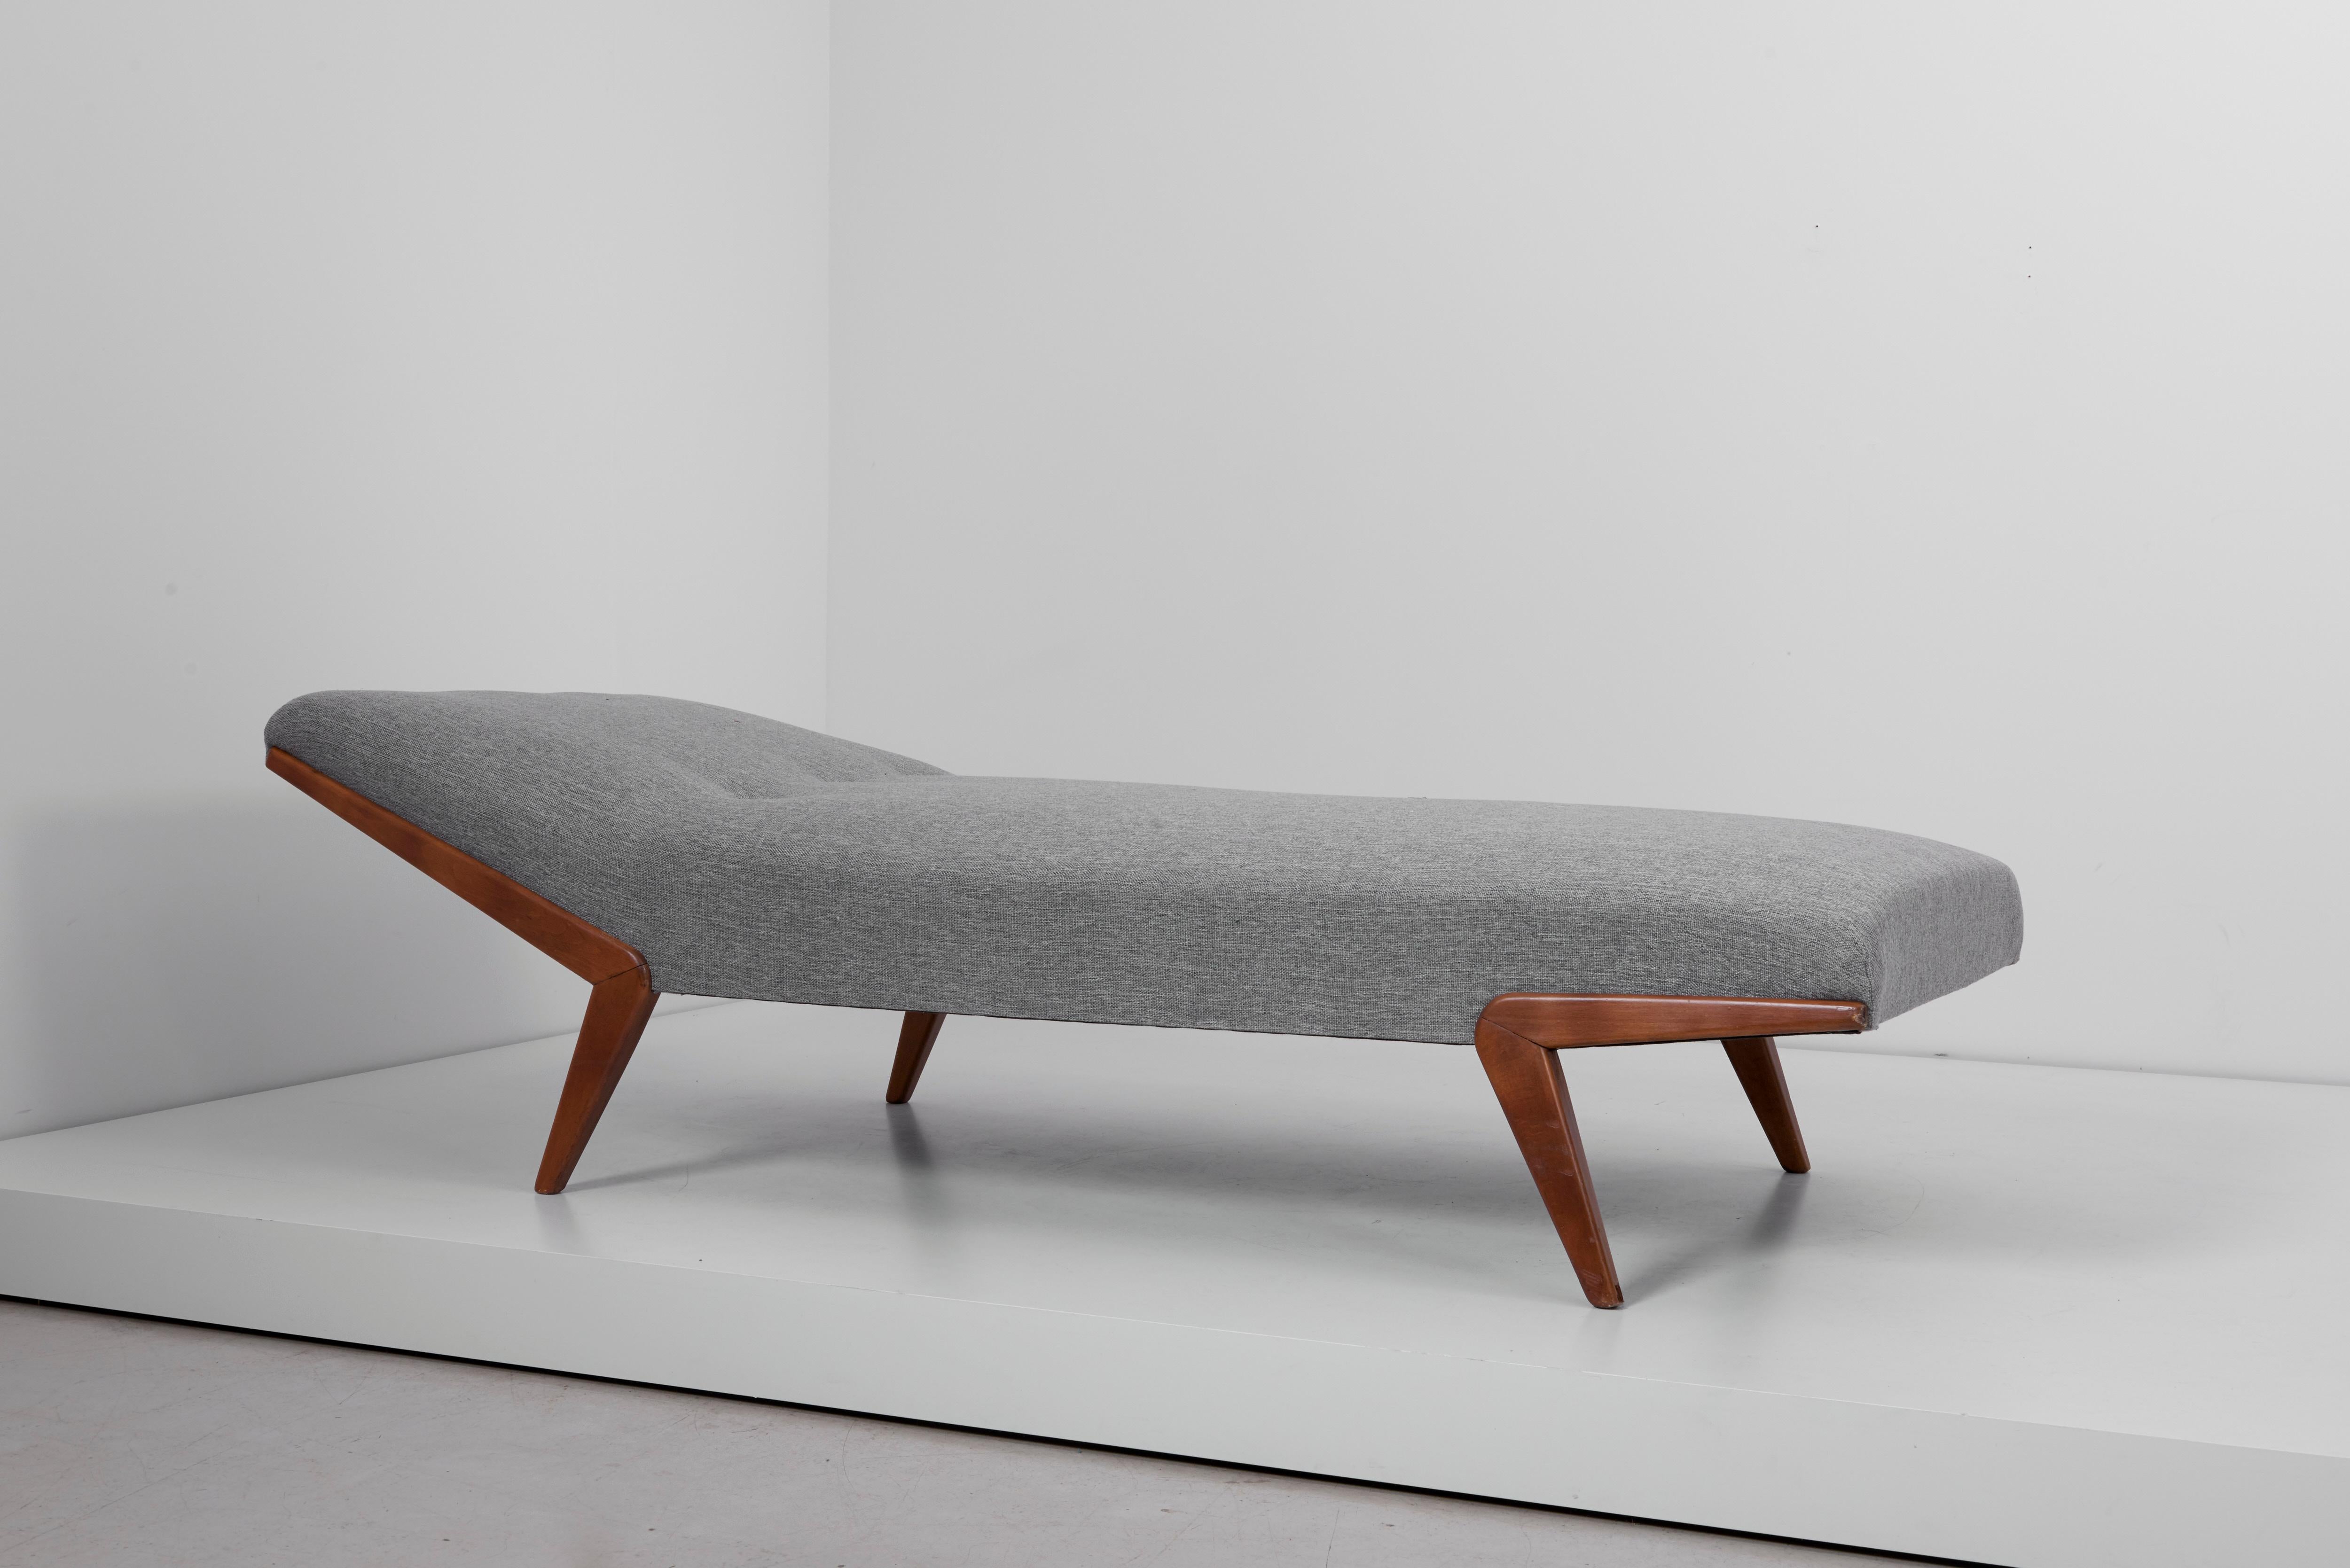 Daybed with wooden boomerang legs. Upholstered in wool. Leather buttons.